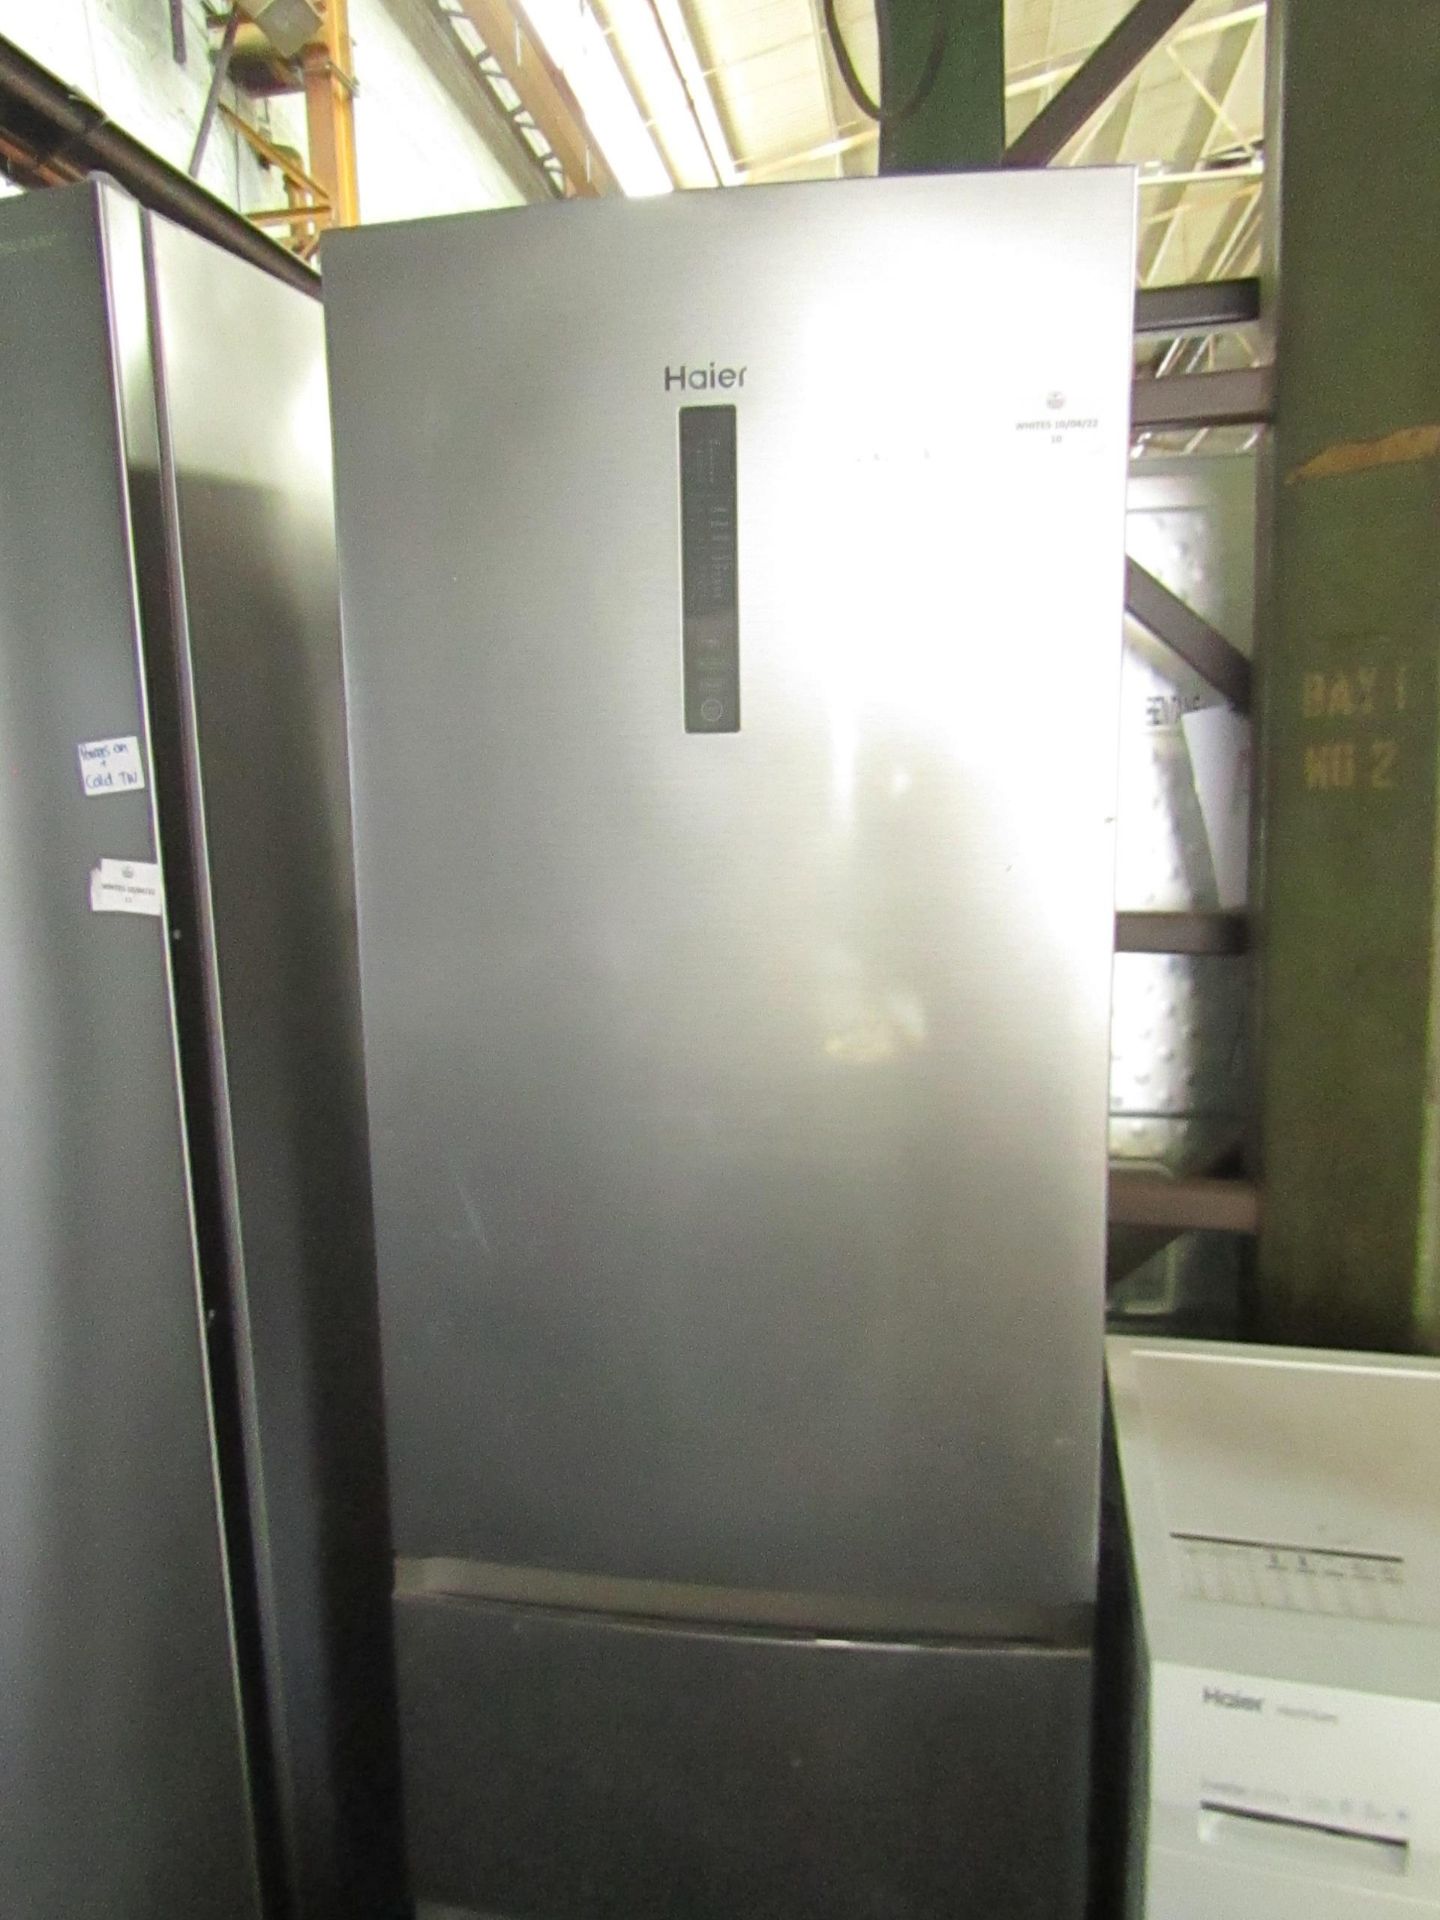 Haier Fridge Freezer, Could do with a clean inside, has a few dents nad marks on the front